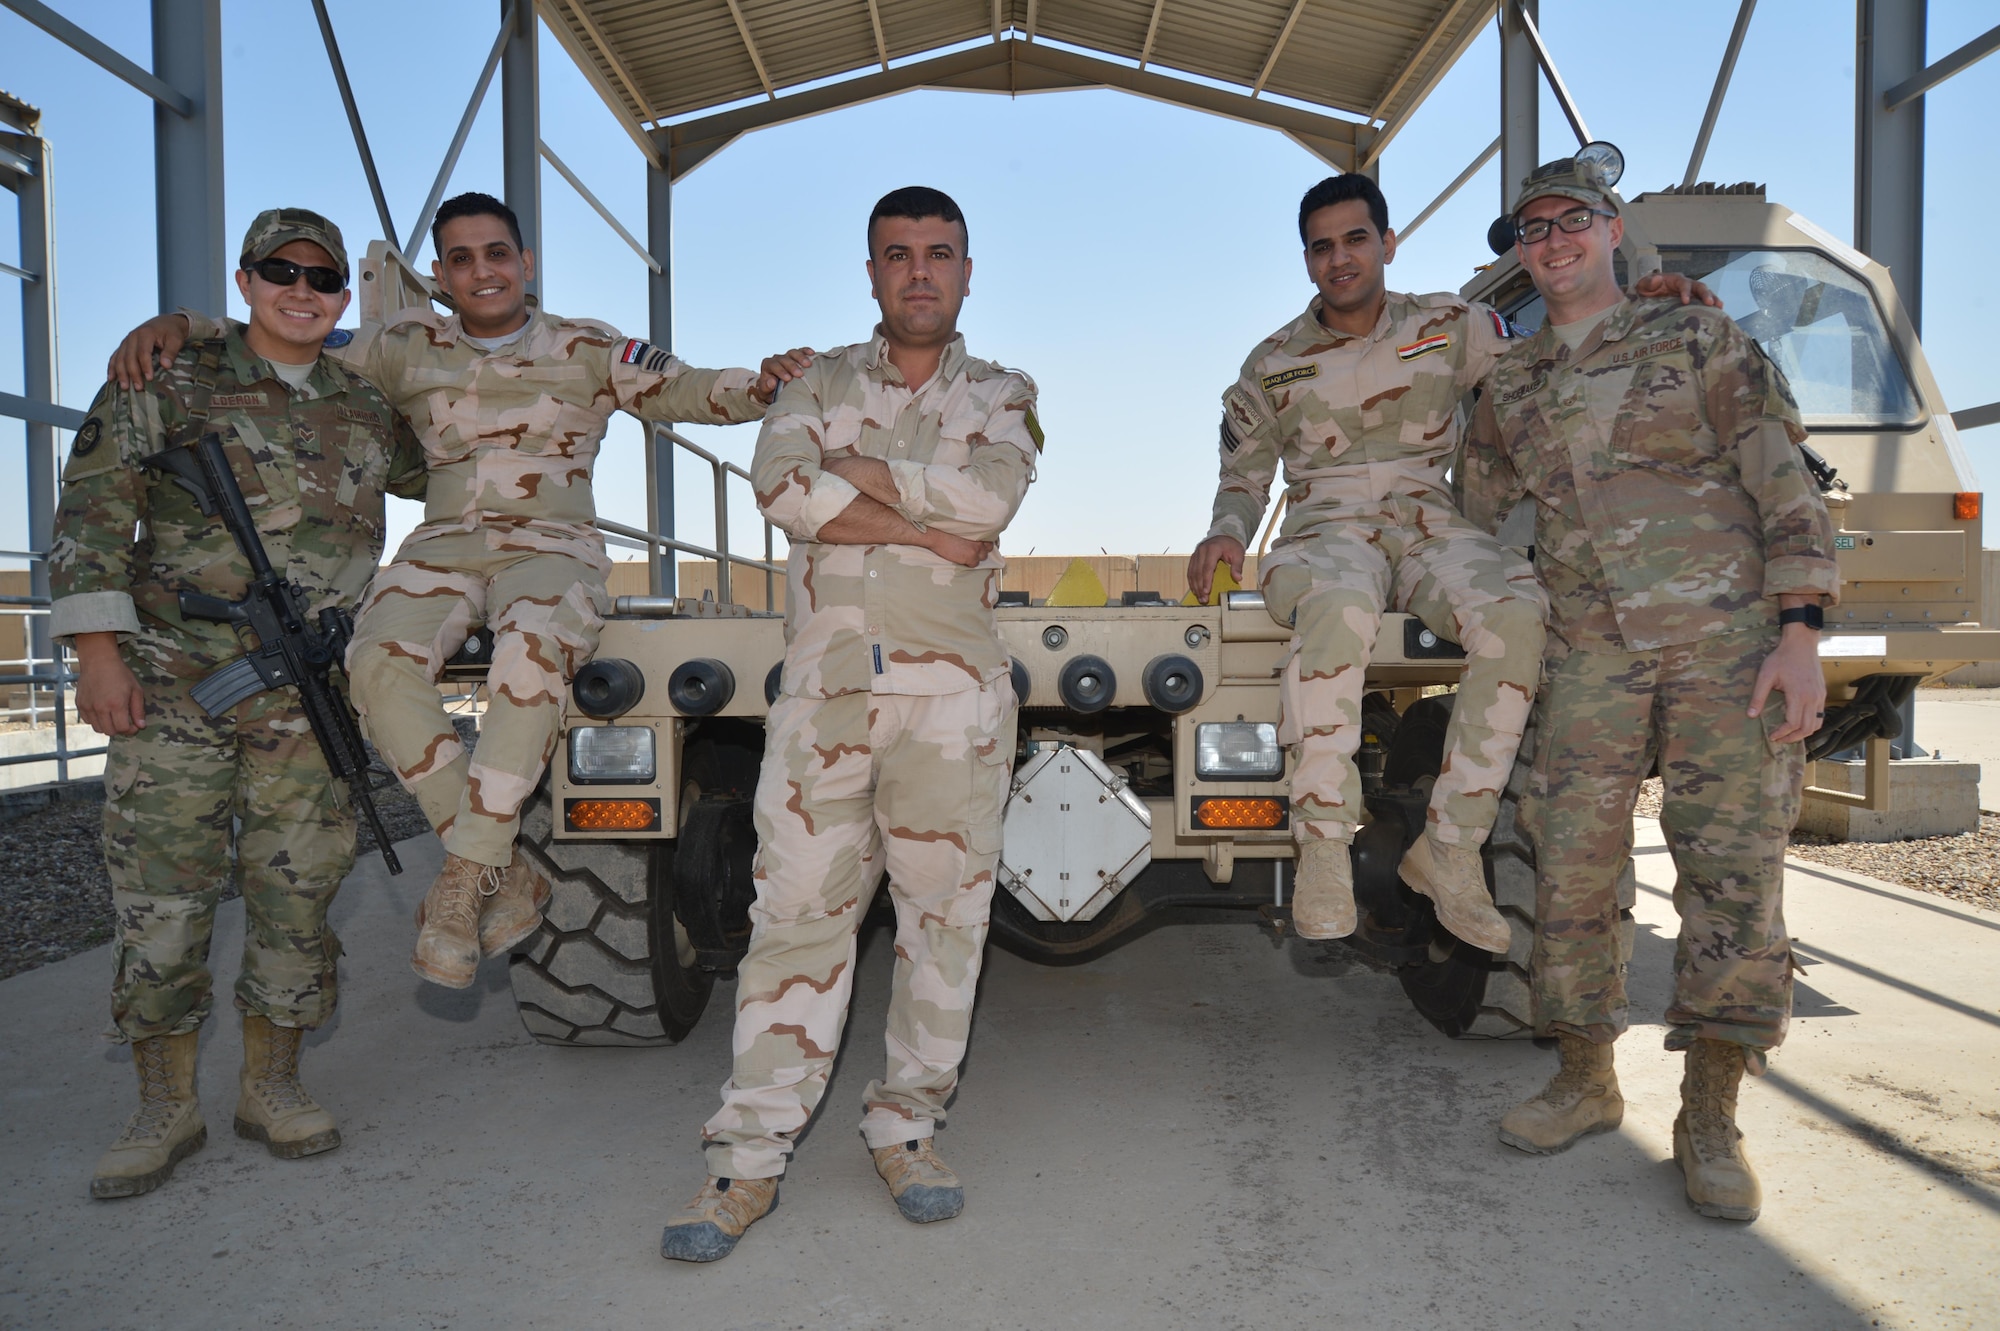 Senior Airman Juan Calderon (far left) and Staff Sgt. Michael Shoemaker (far right), 370th Air Expeditionary Advisory Group air advisors, pose for a photo with Iraqi Air Force airmen at Al Muthana Air Base, April 23, 2018. The air advisors work with their Iraqi counterparts to assist with training and safety protocols specific to their expertise. (Air Force photo by Staff Sgt. William Banton)